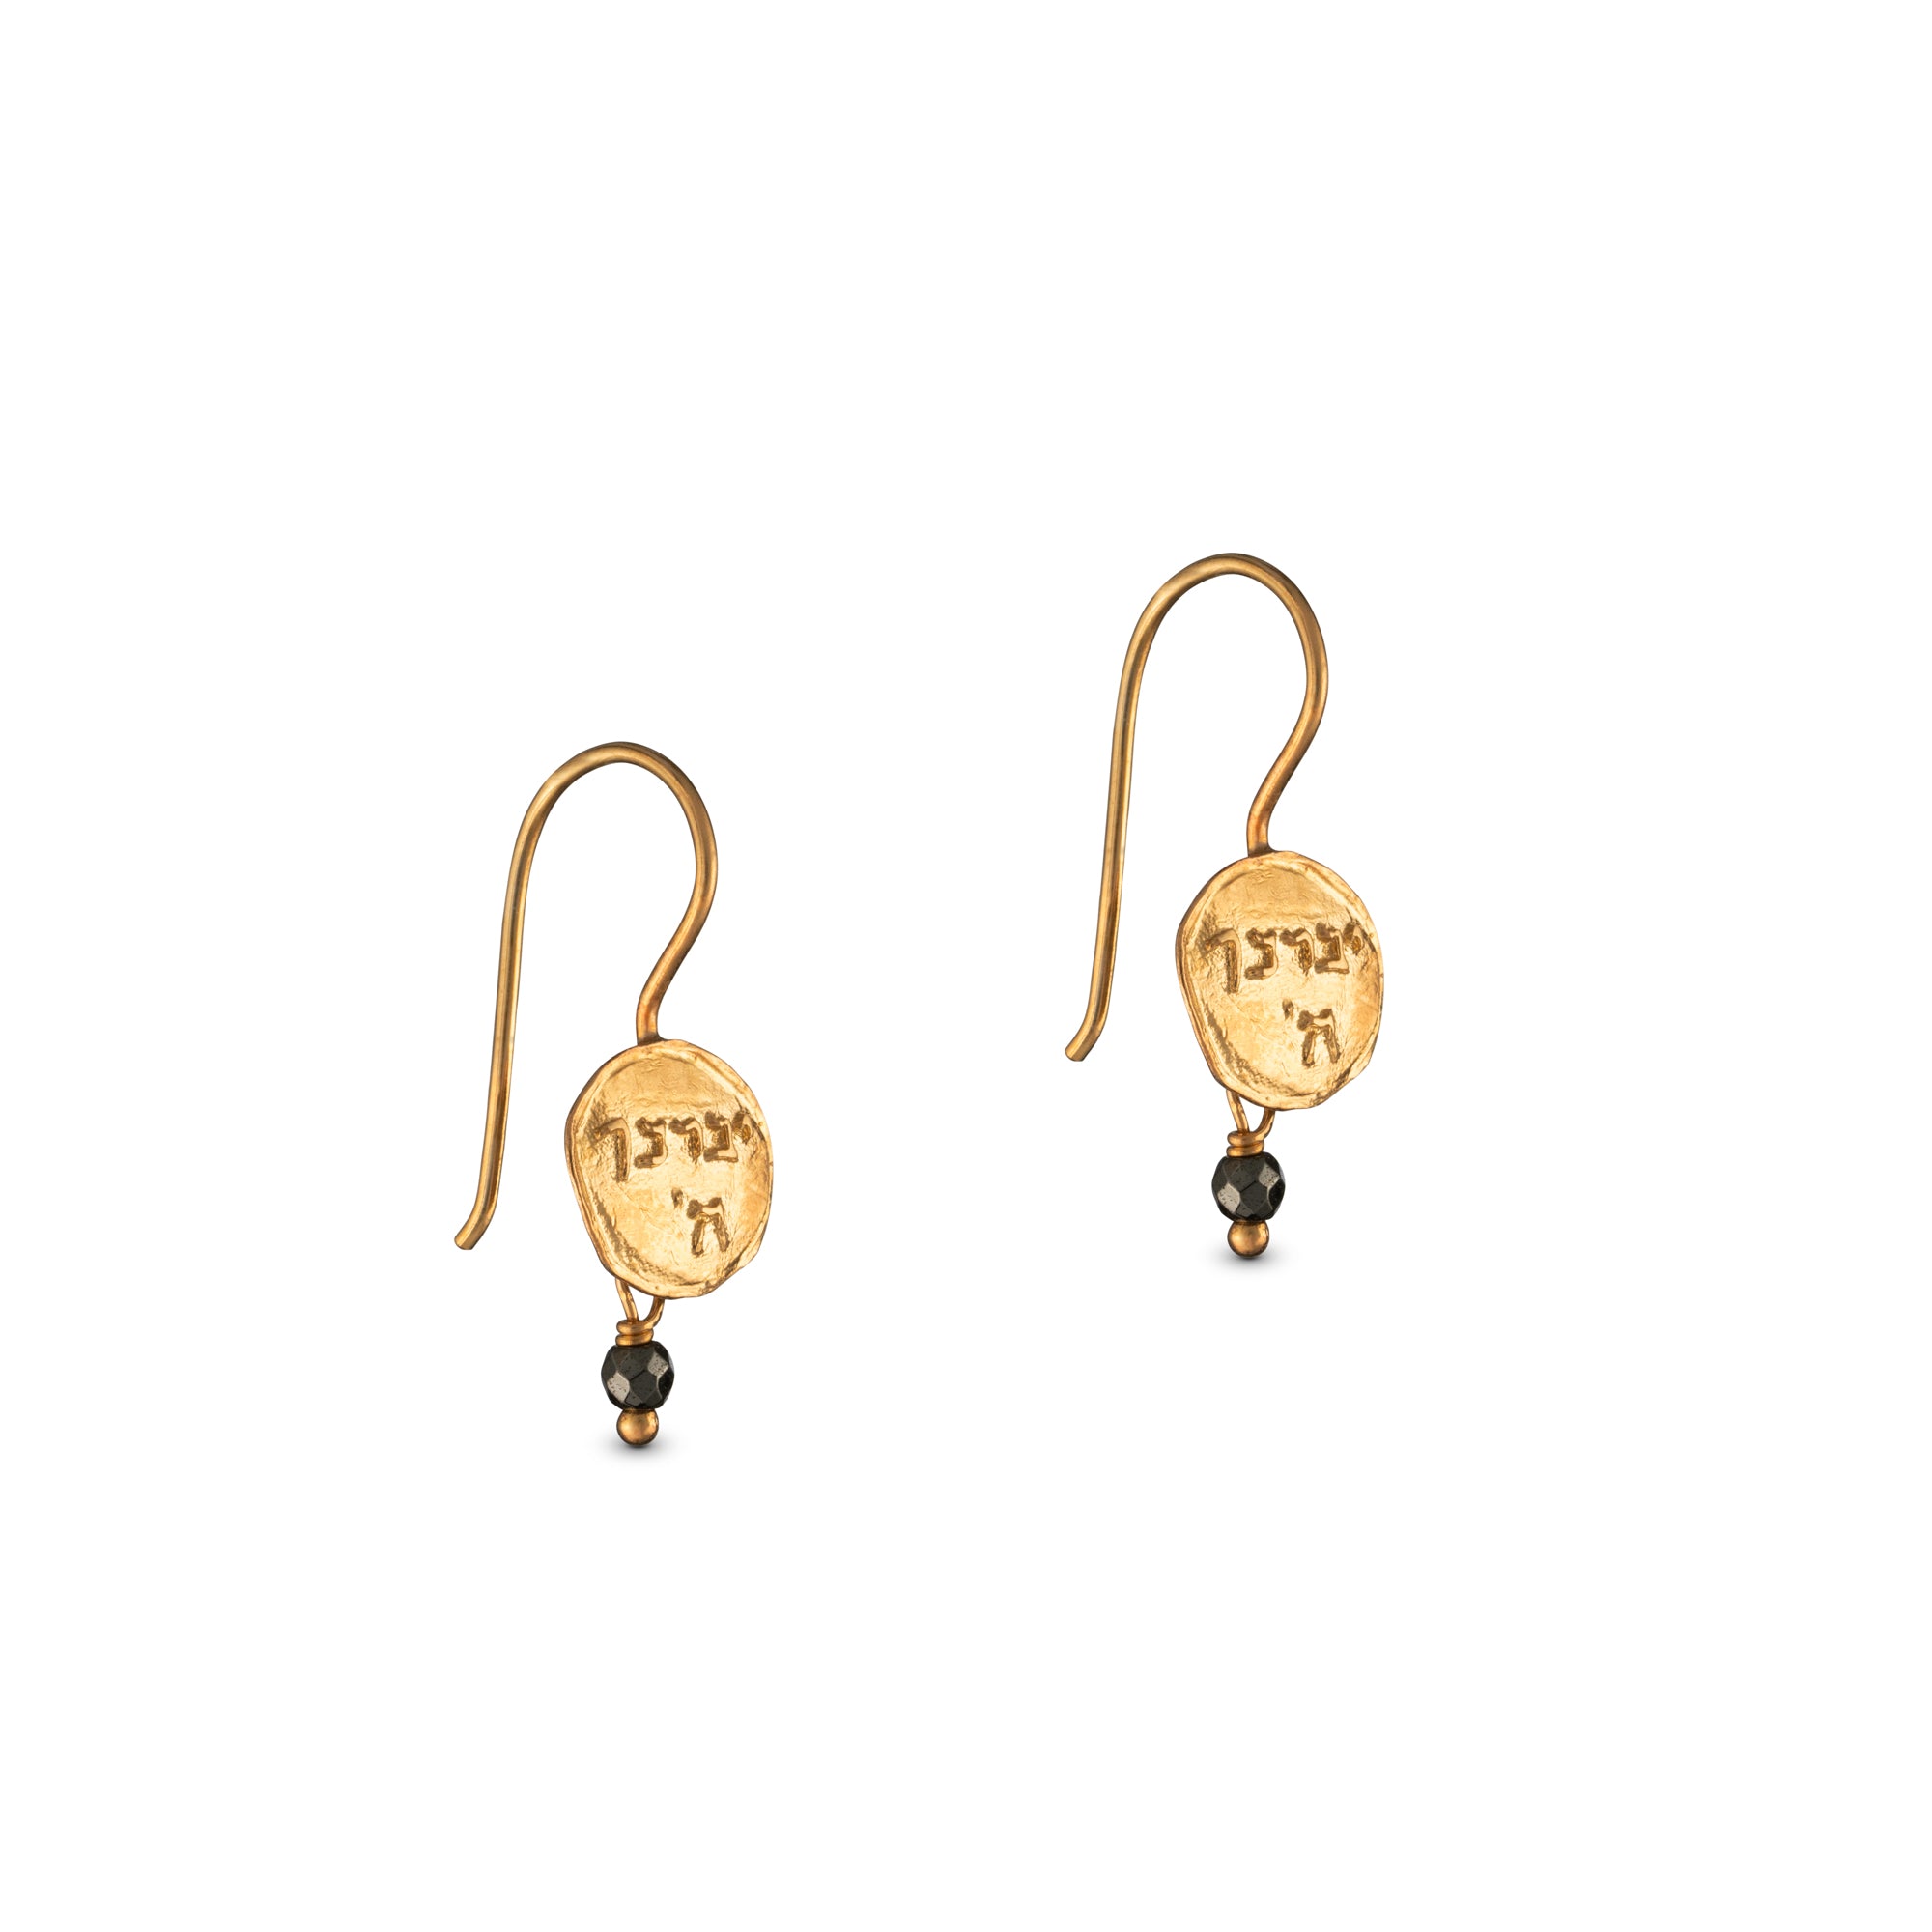 Lord WILL BLESS YOU EARRINGS SILVER AND GOLD PLATED